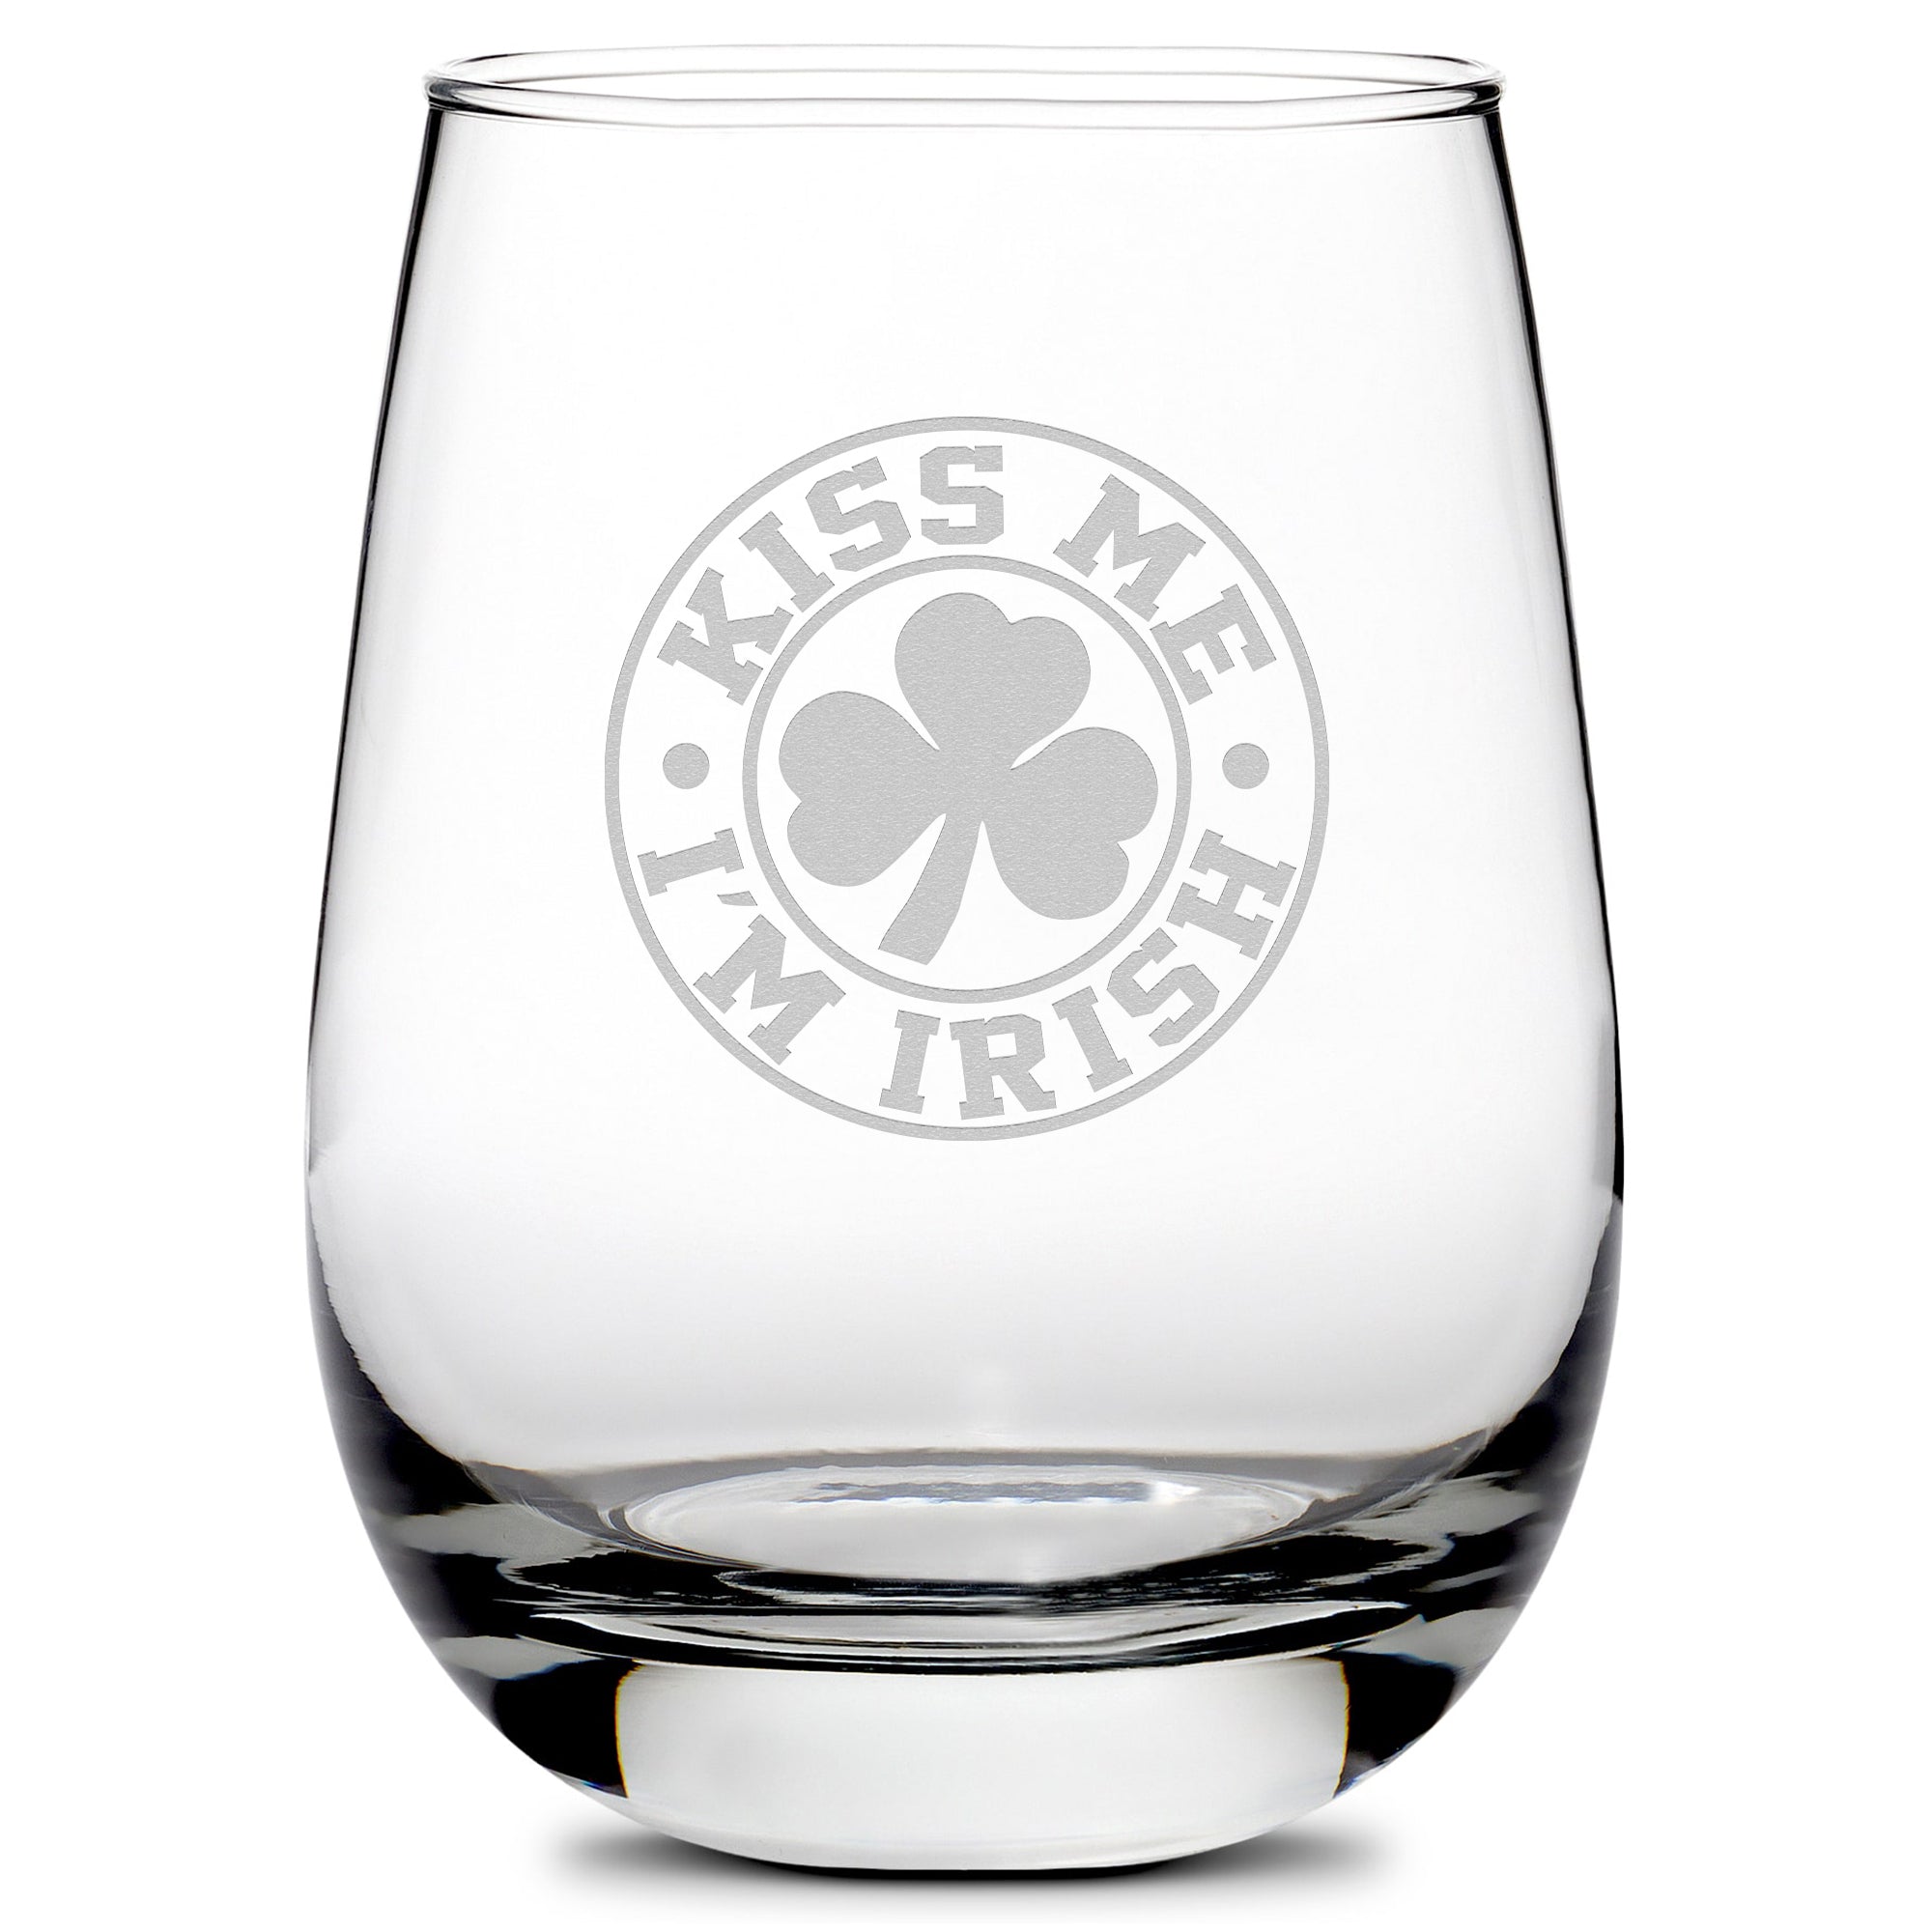 Premium Stemless Wine Glass, Kiss Me I'm Irish, 16oz, Laser Etched or Hand Etched